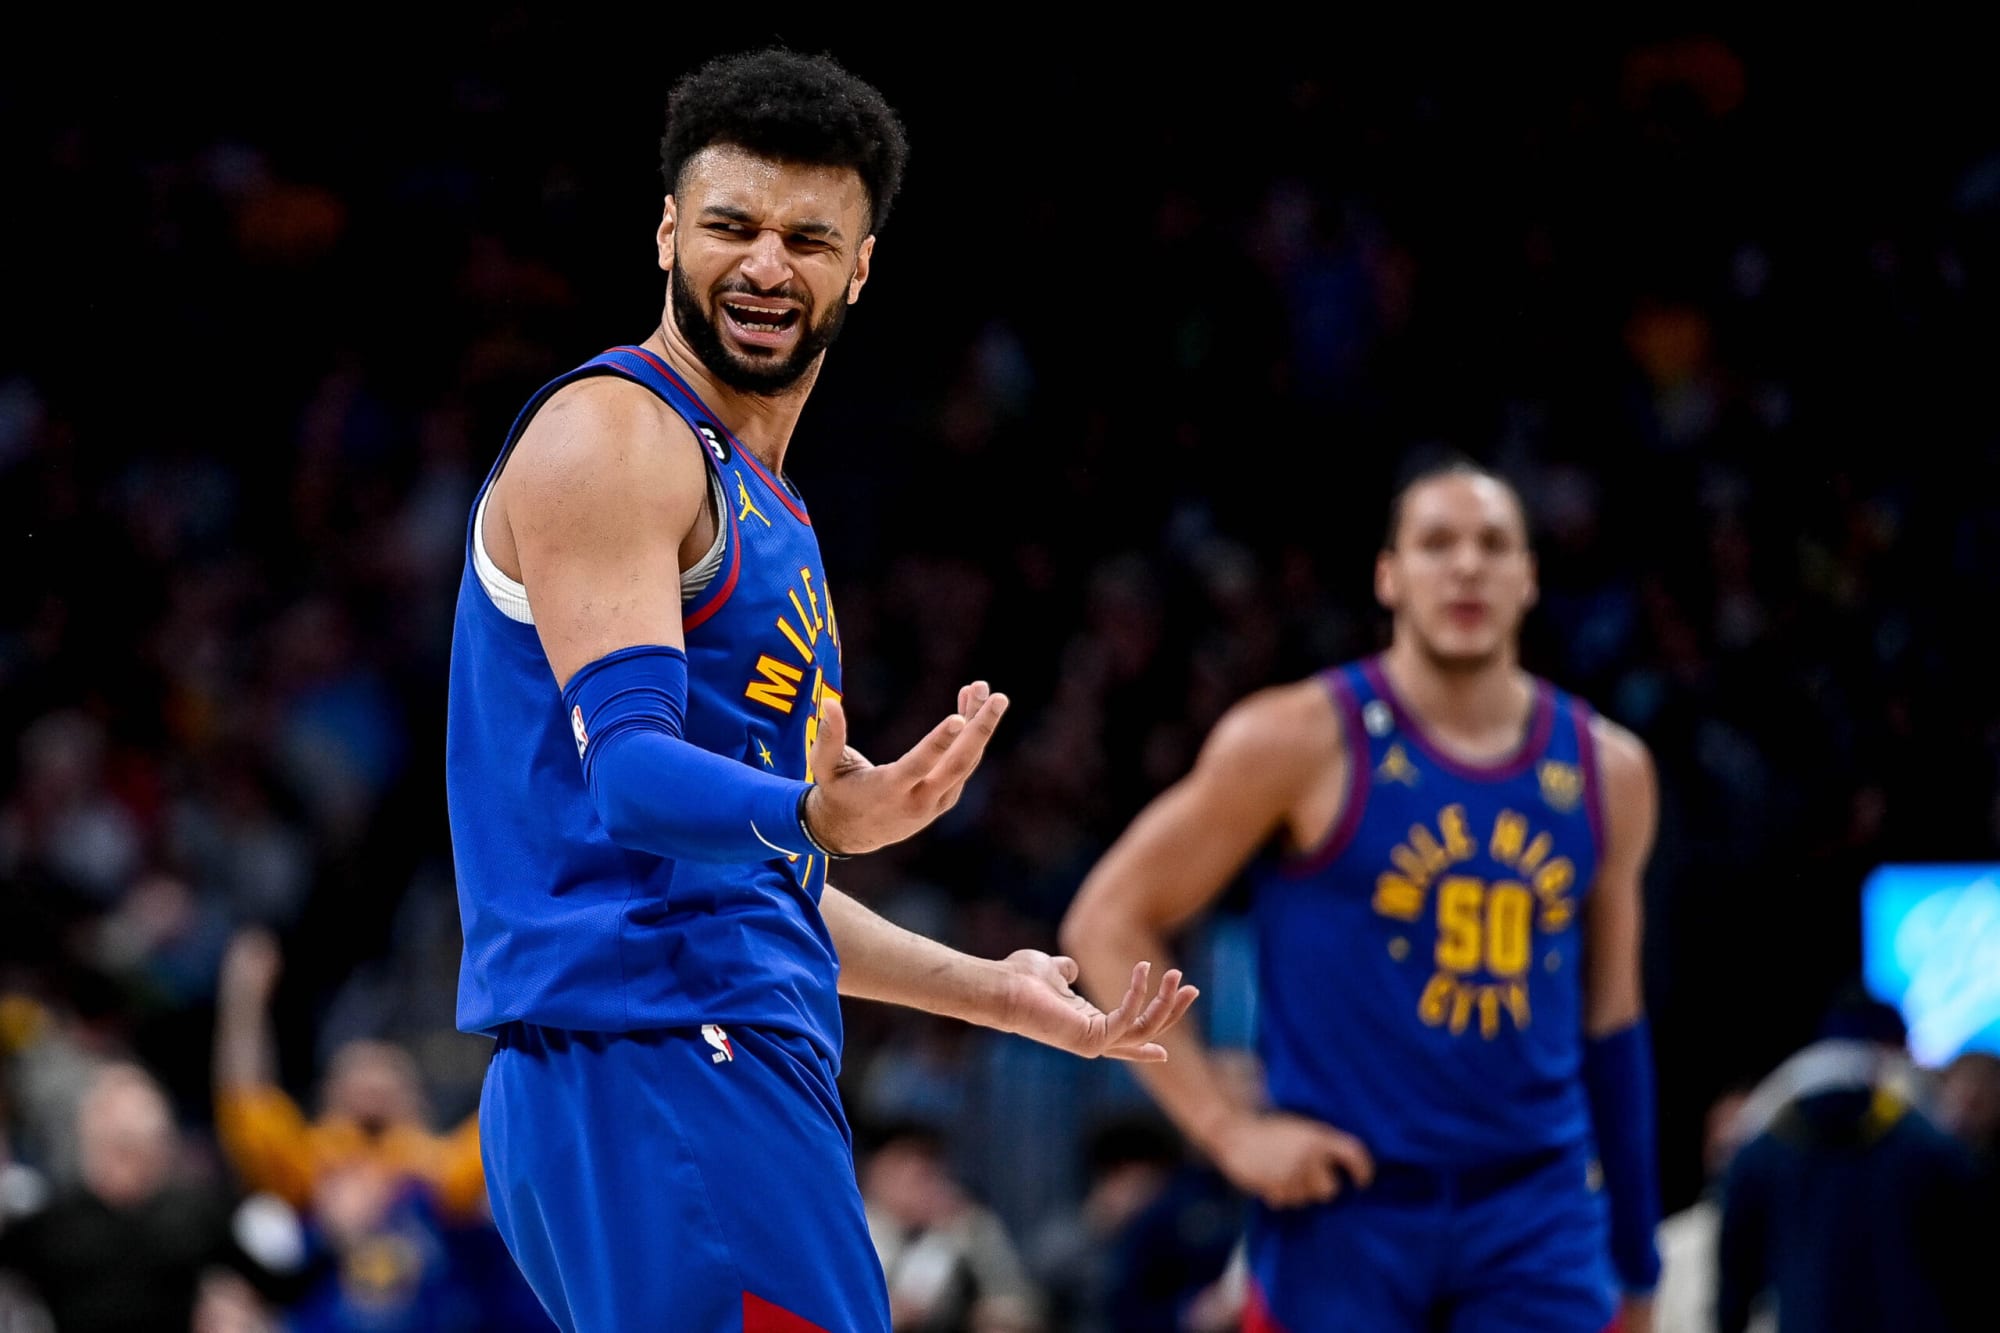 Should Denver Nuggets fans be rooting against Jamal Murray? The potential impact of Murray’s All-NBA honors on his contract and the team’s future. Comparison to Jaylen Brown’s contract situation with the Boston Celtics.